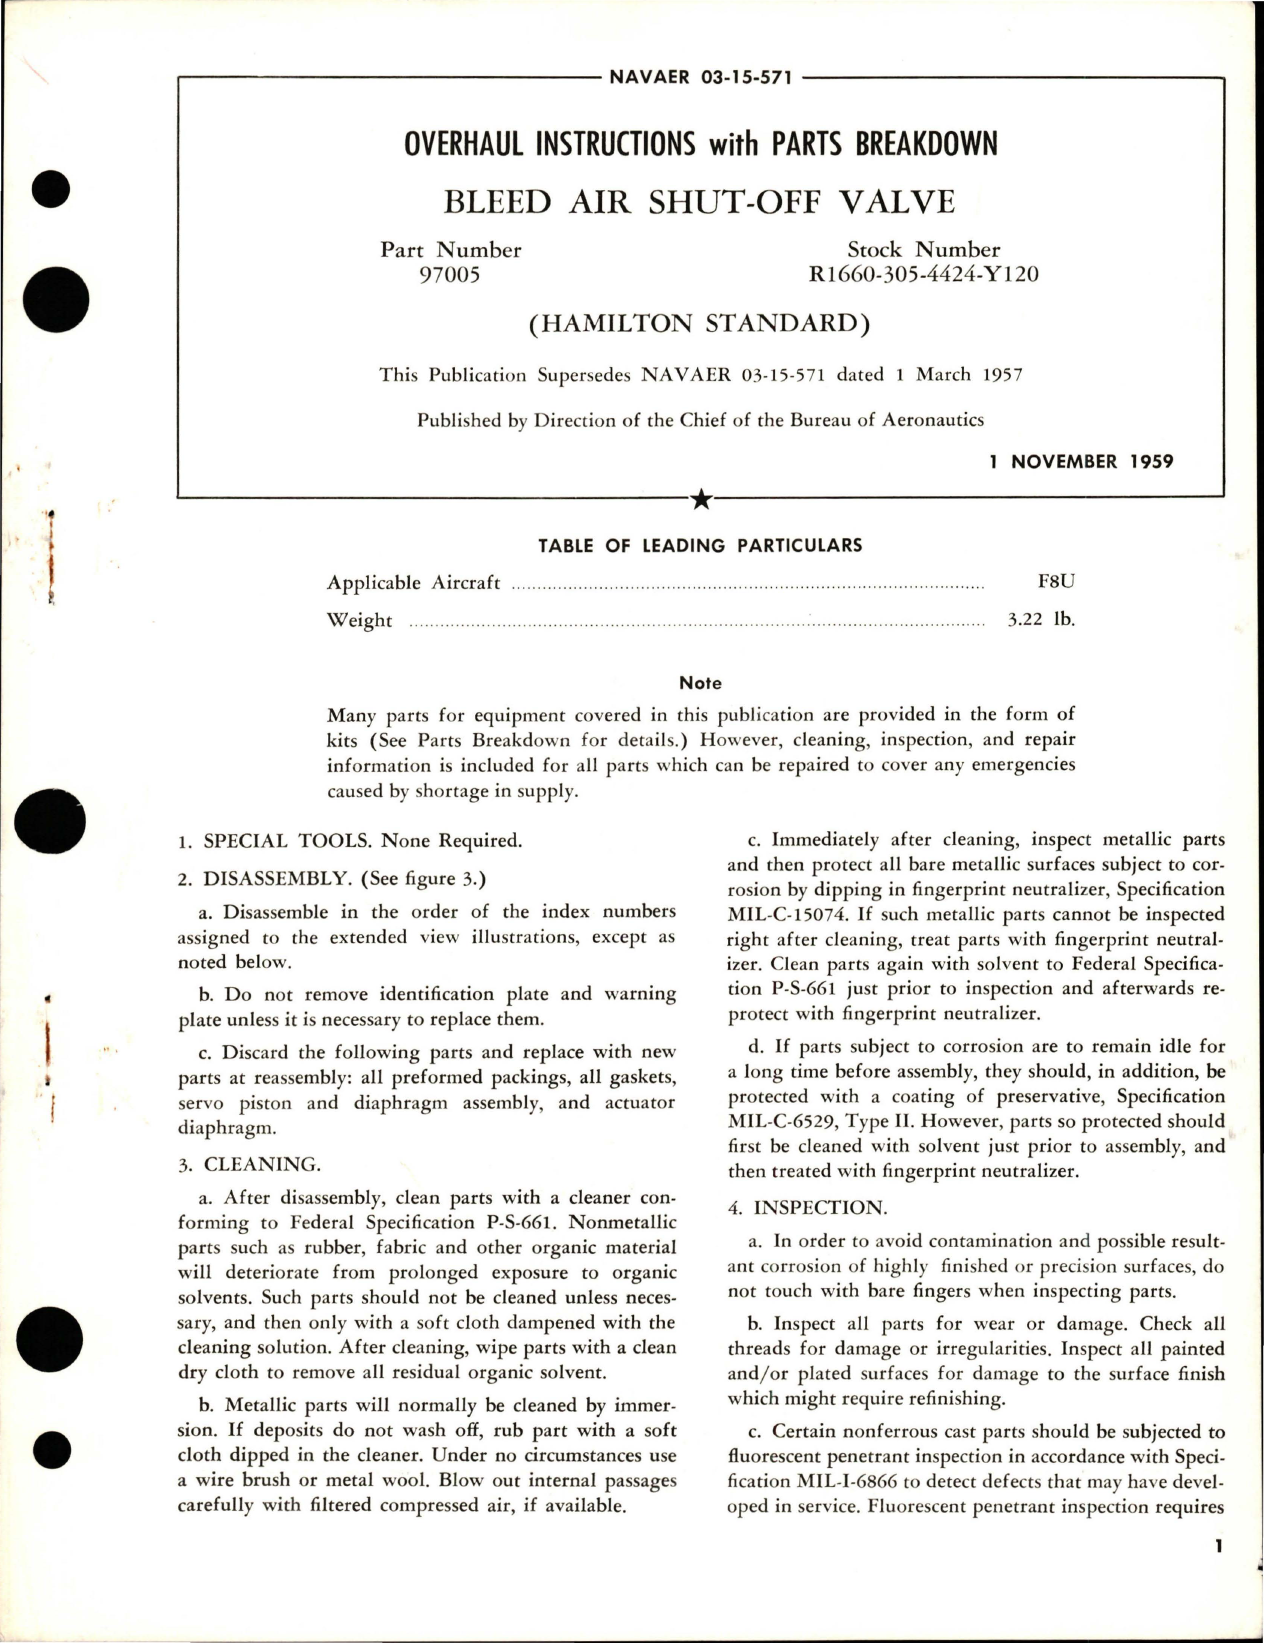 Sample page 1 from AirCorps Library document: Overhaul Instructions with Parts for Bleed Air Shut-Off Valve - Part 97005